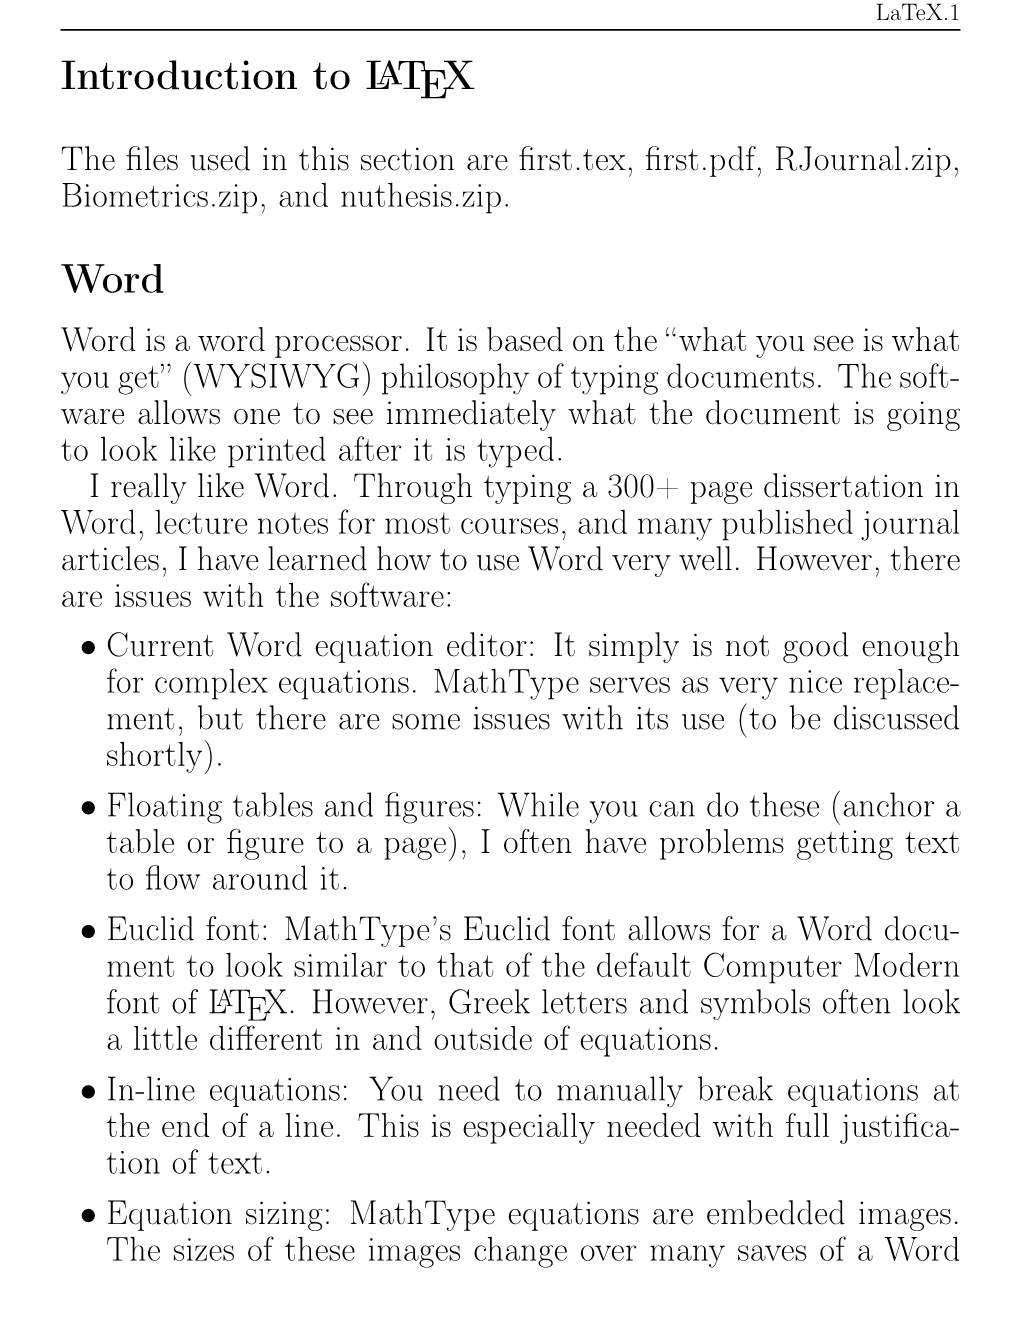 Introduction to LATEX Word